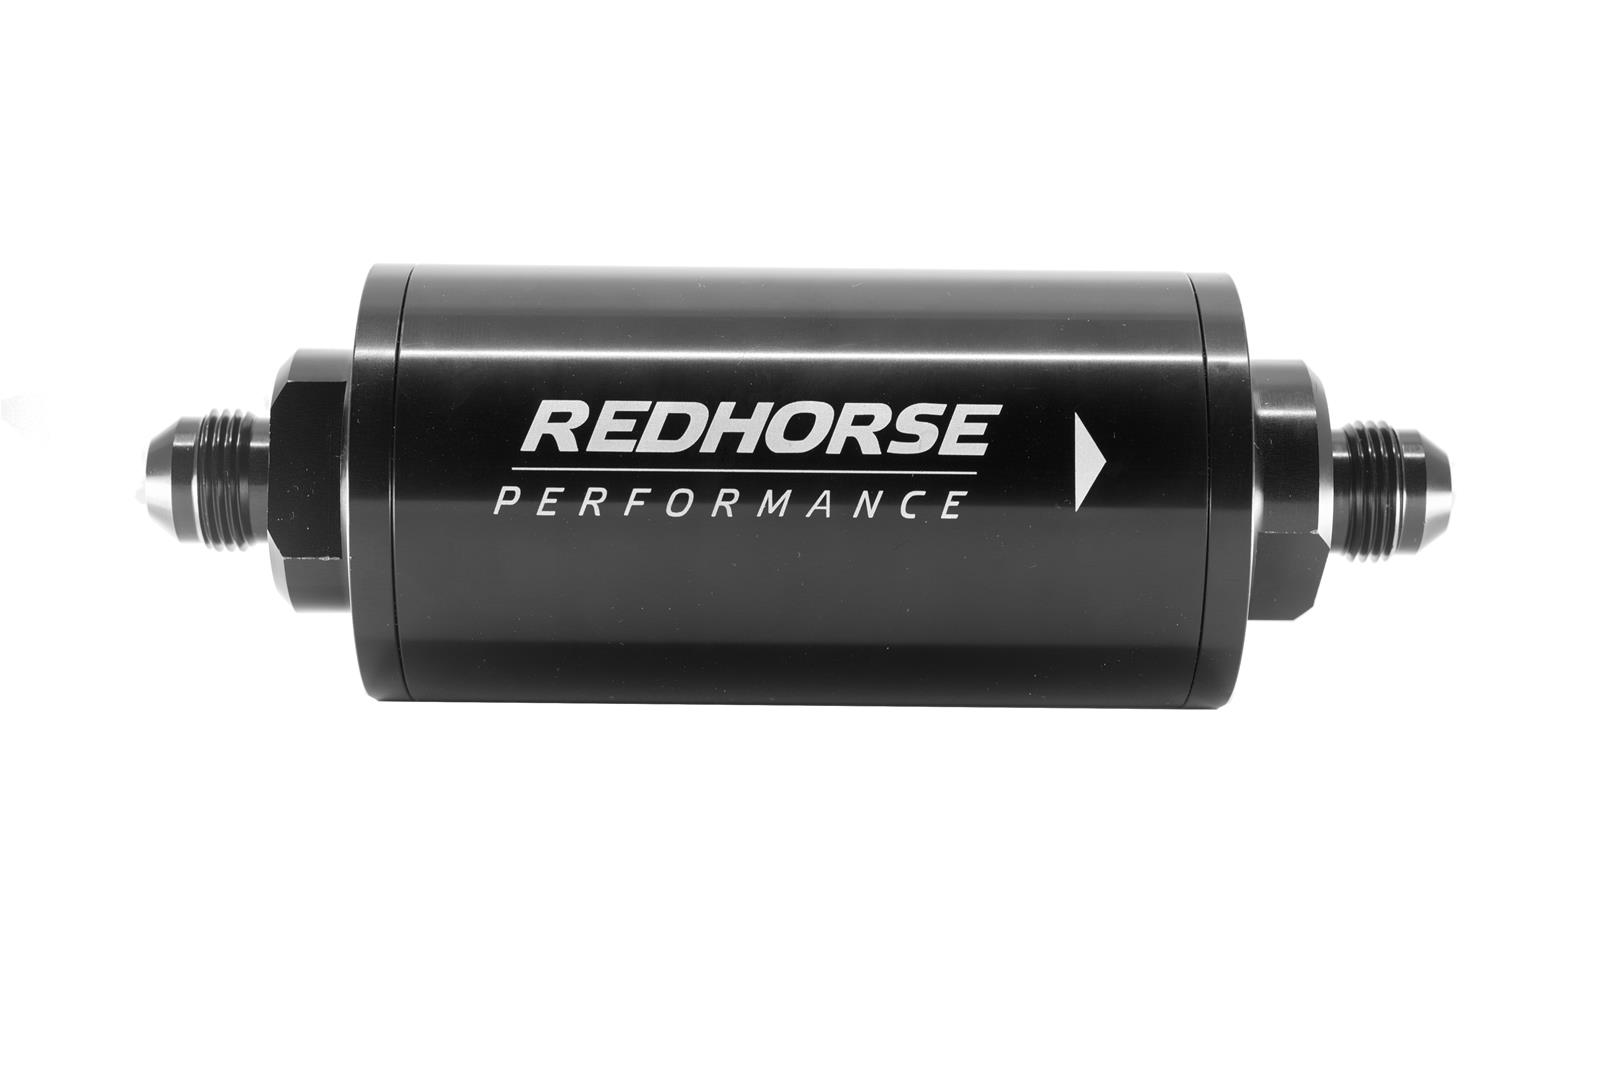 Redhorse Performance 4651-12-2-100 6in Cylindrical In-Line Race Fuel Filter w/ 100 Micron S.S. element - 12 AN